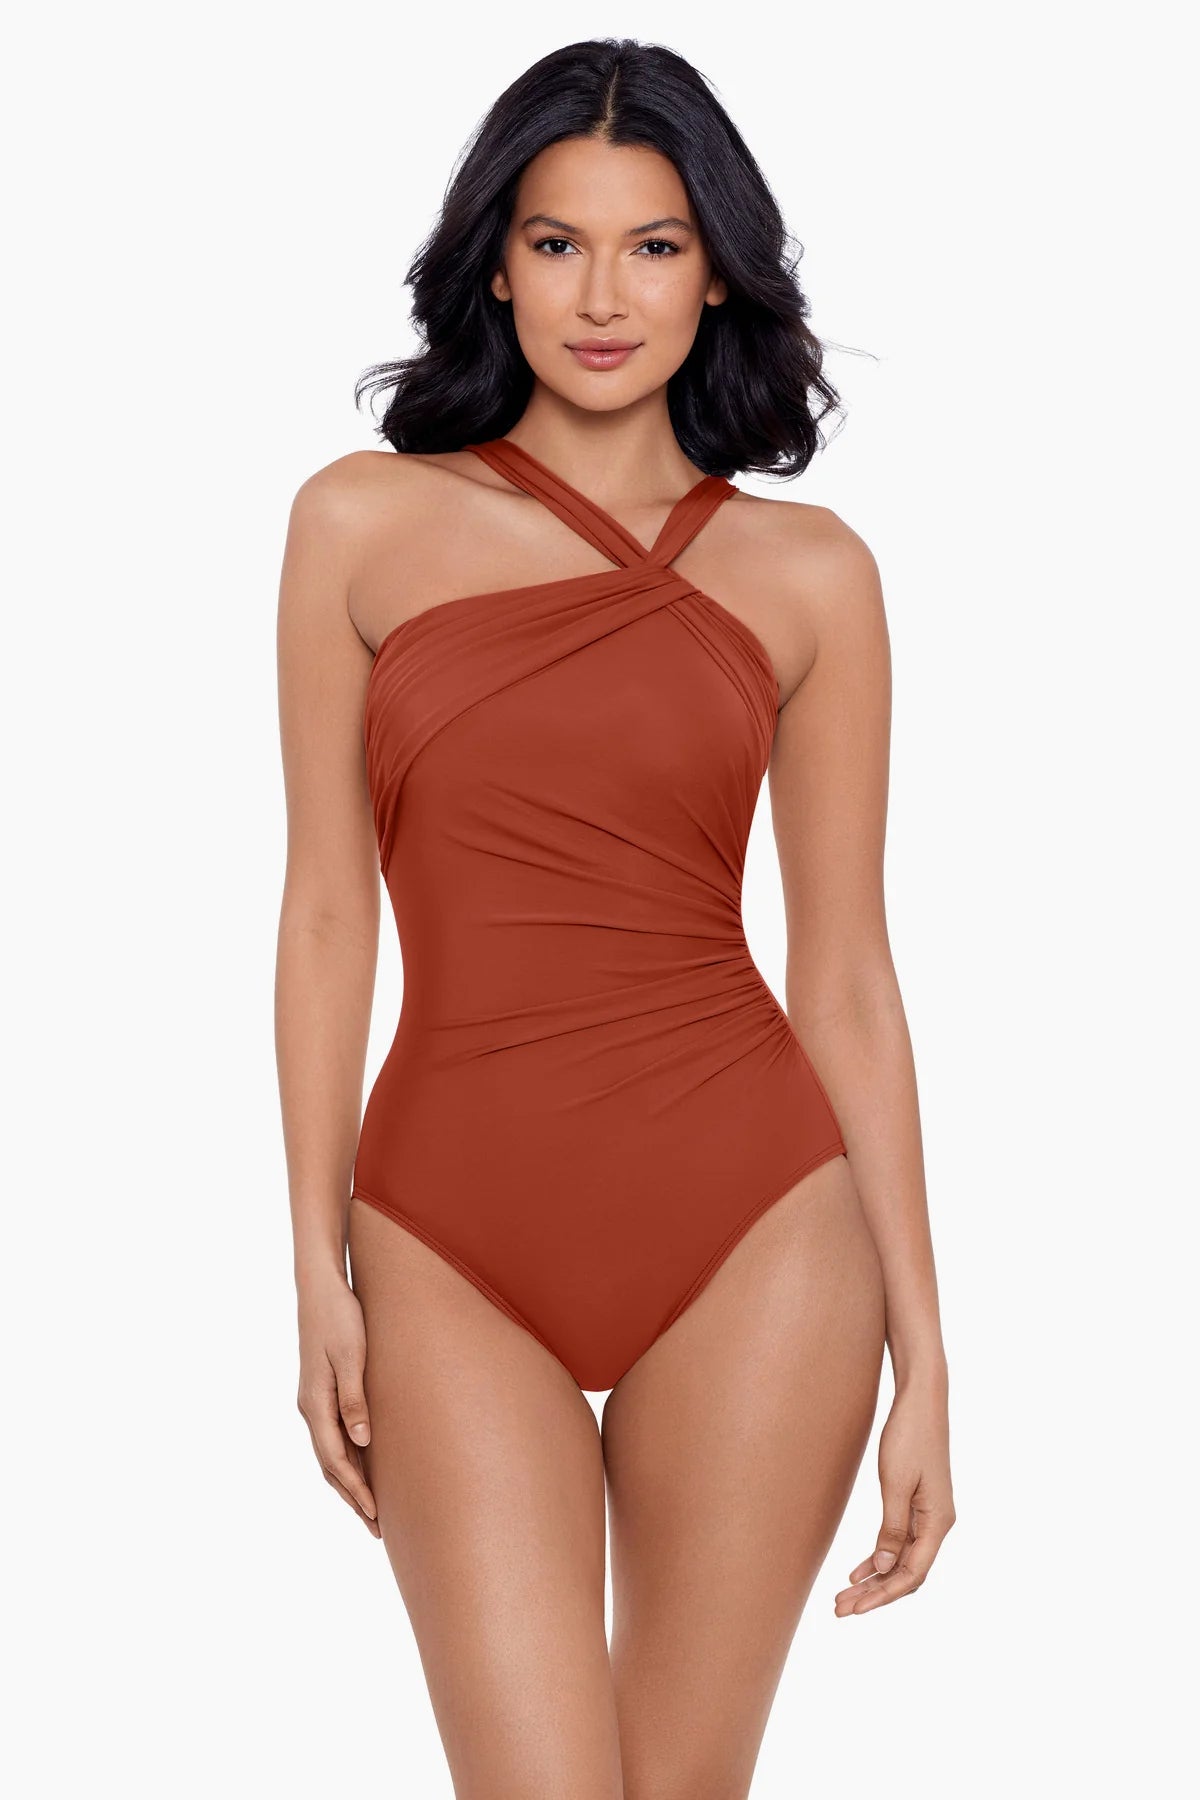 MiracleSuit: buy brand products at Bralissimo - Canada and U.S. delivery